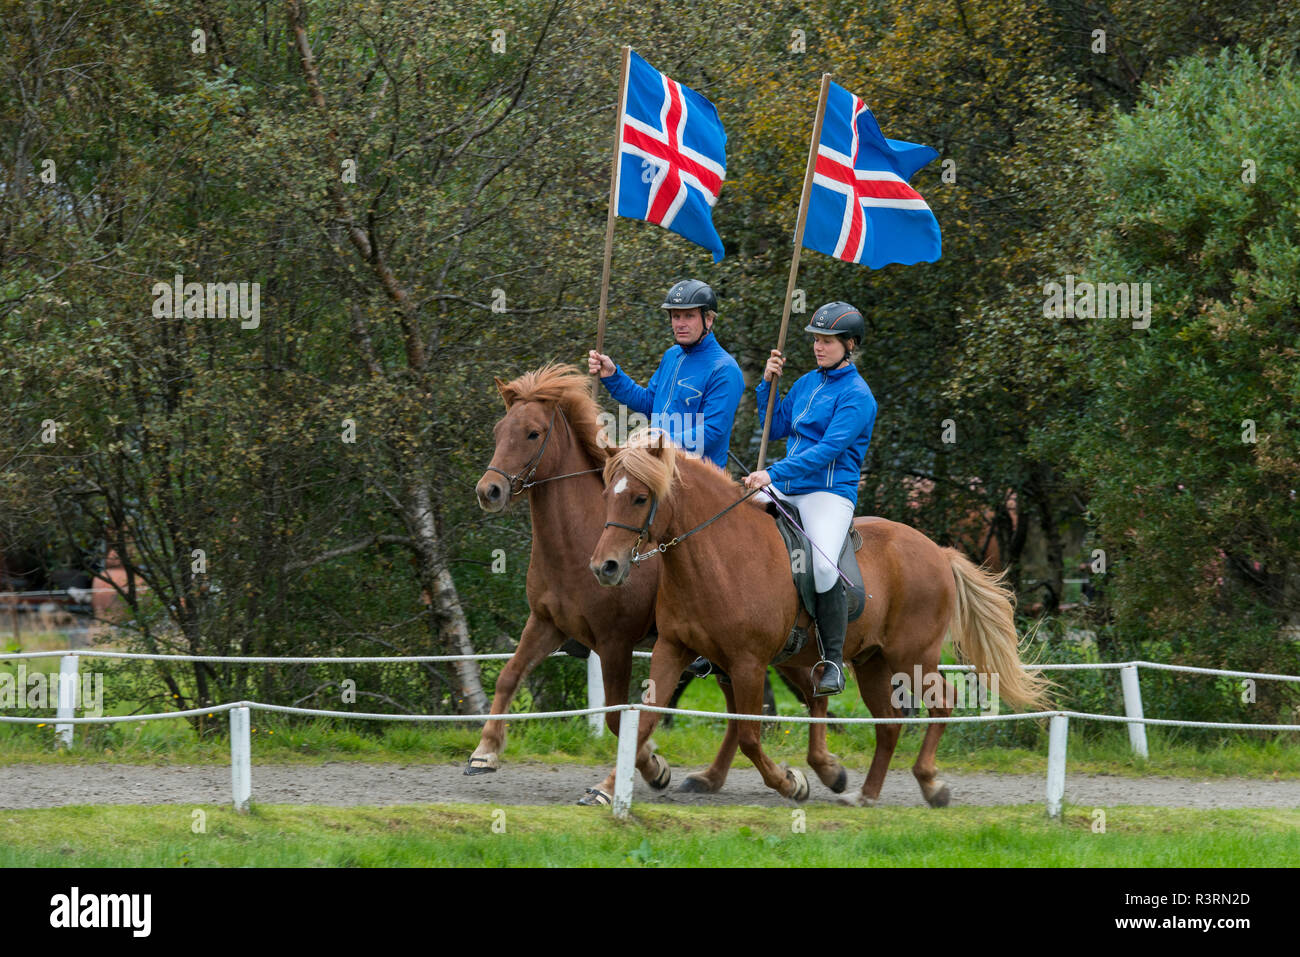 Southwestern Iceland, Reykjavik. Fridheimar, countryside Icelandic horse ranch, horse show. Riders with flags. (Editorial use only) Stock Photo